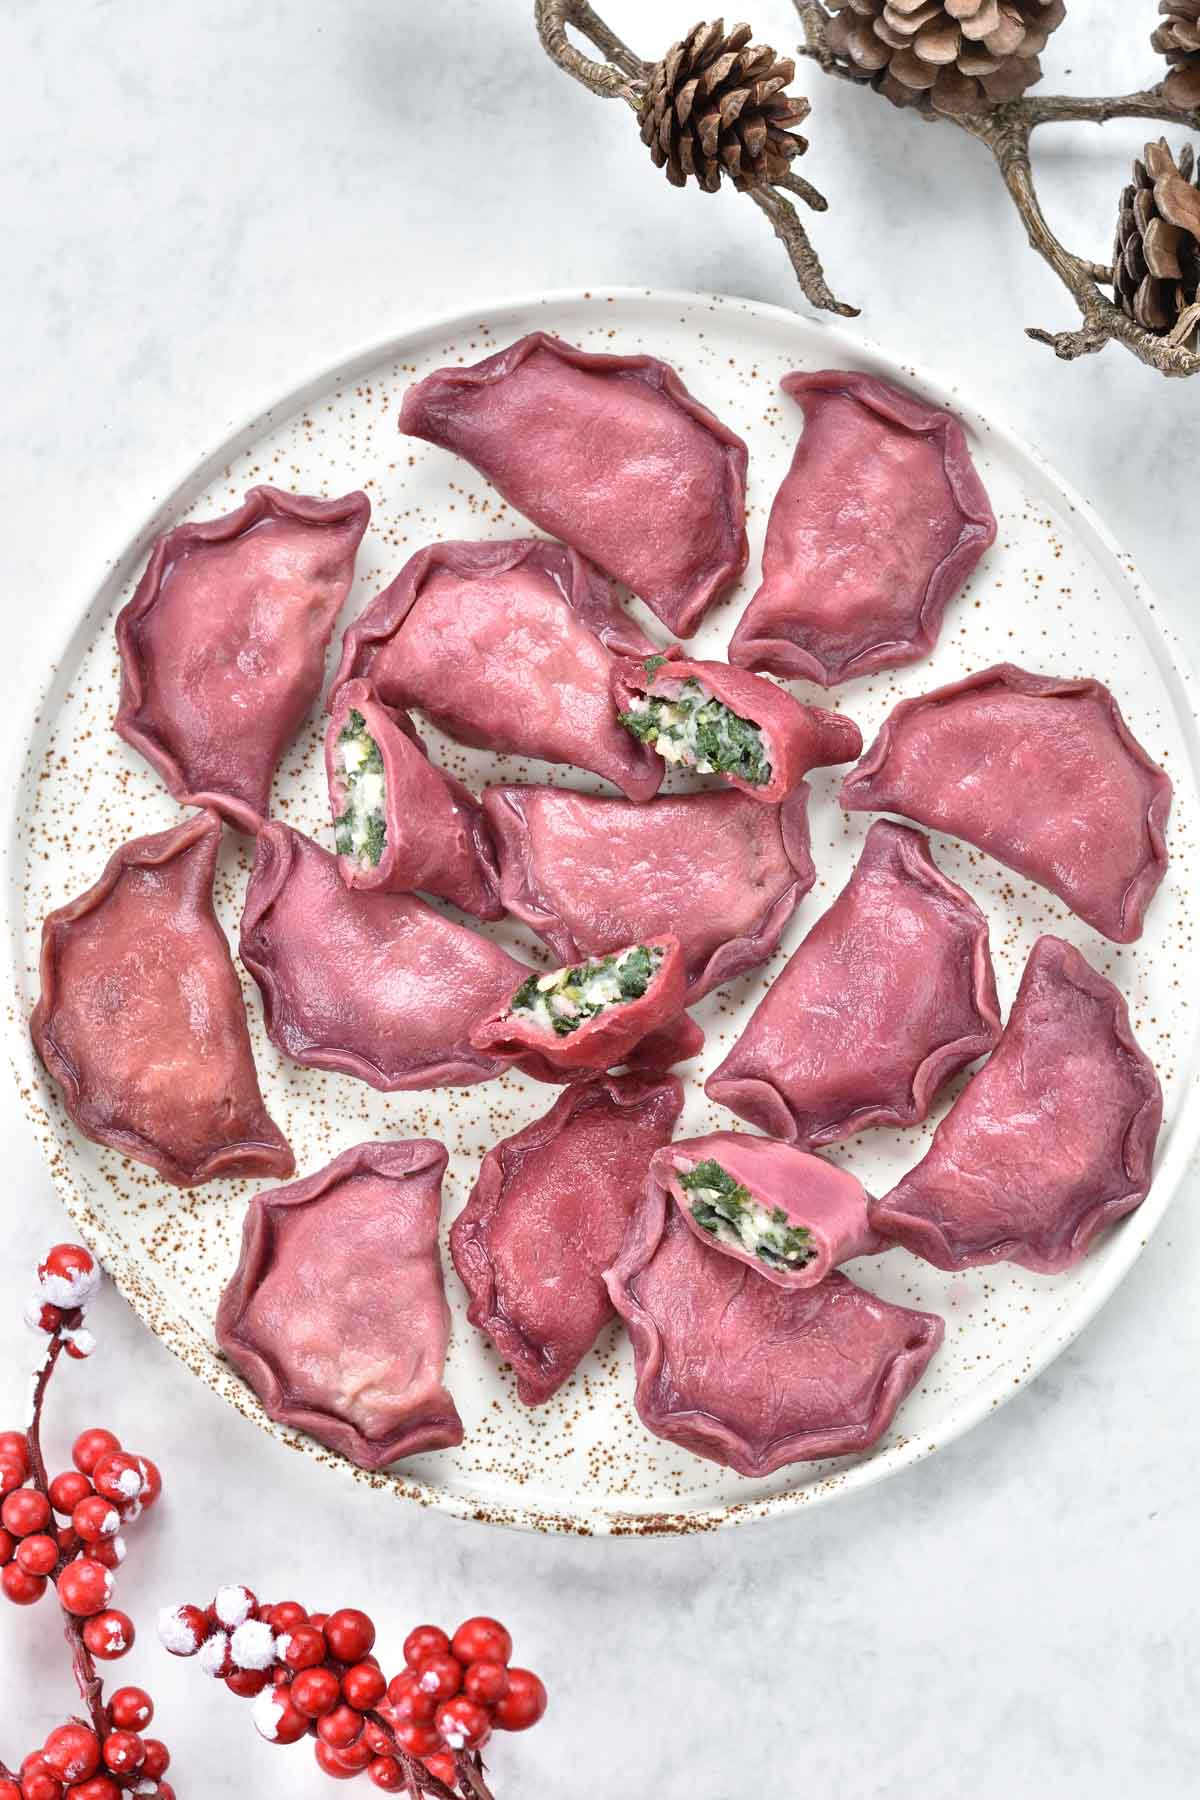 Pink pierogi with spinach and potato filling on a white plate.